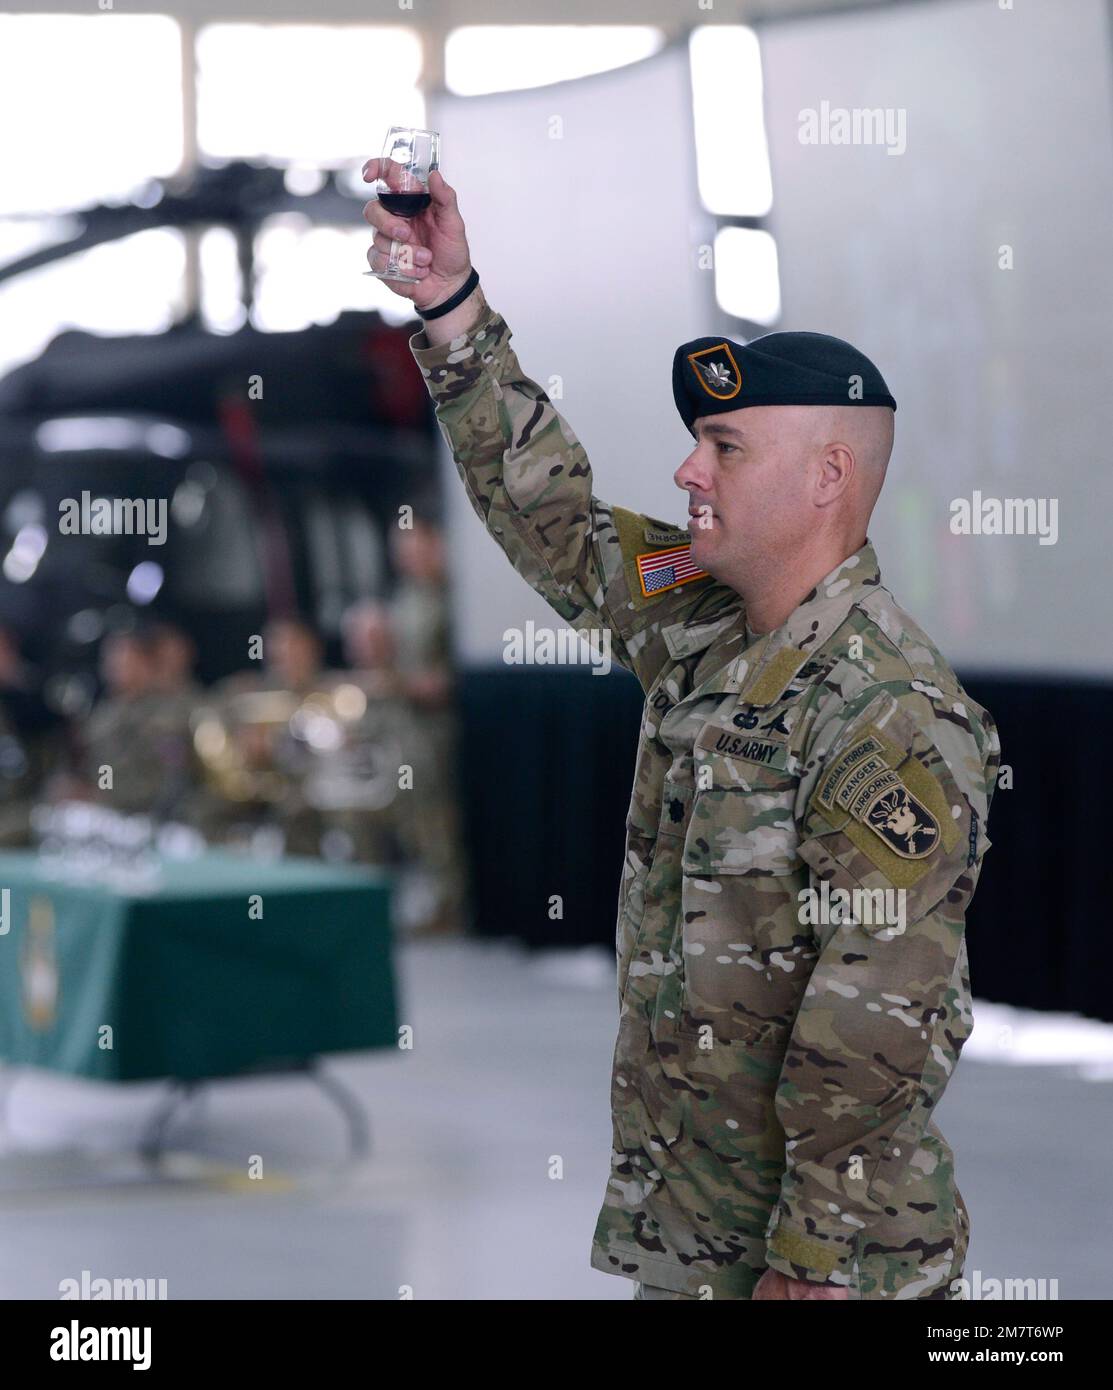 Lieutenant Colonel Patrick Toohey, commander, 4th Battalion, 1st Special Warfare Training Group (Airborne) toasts the Special Forces Regiment during a graduation ceremony at Fort Bragg, North Carolina May 12, 2022. The ceremony marked the completion of the Special Forces Qualification Course where Soldiers earned the honor of wearing the green beret, the official headgear of Special Forces. Stock Photo